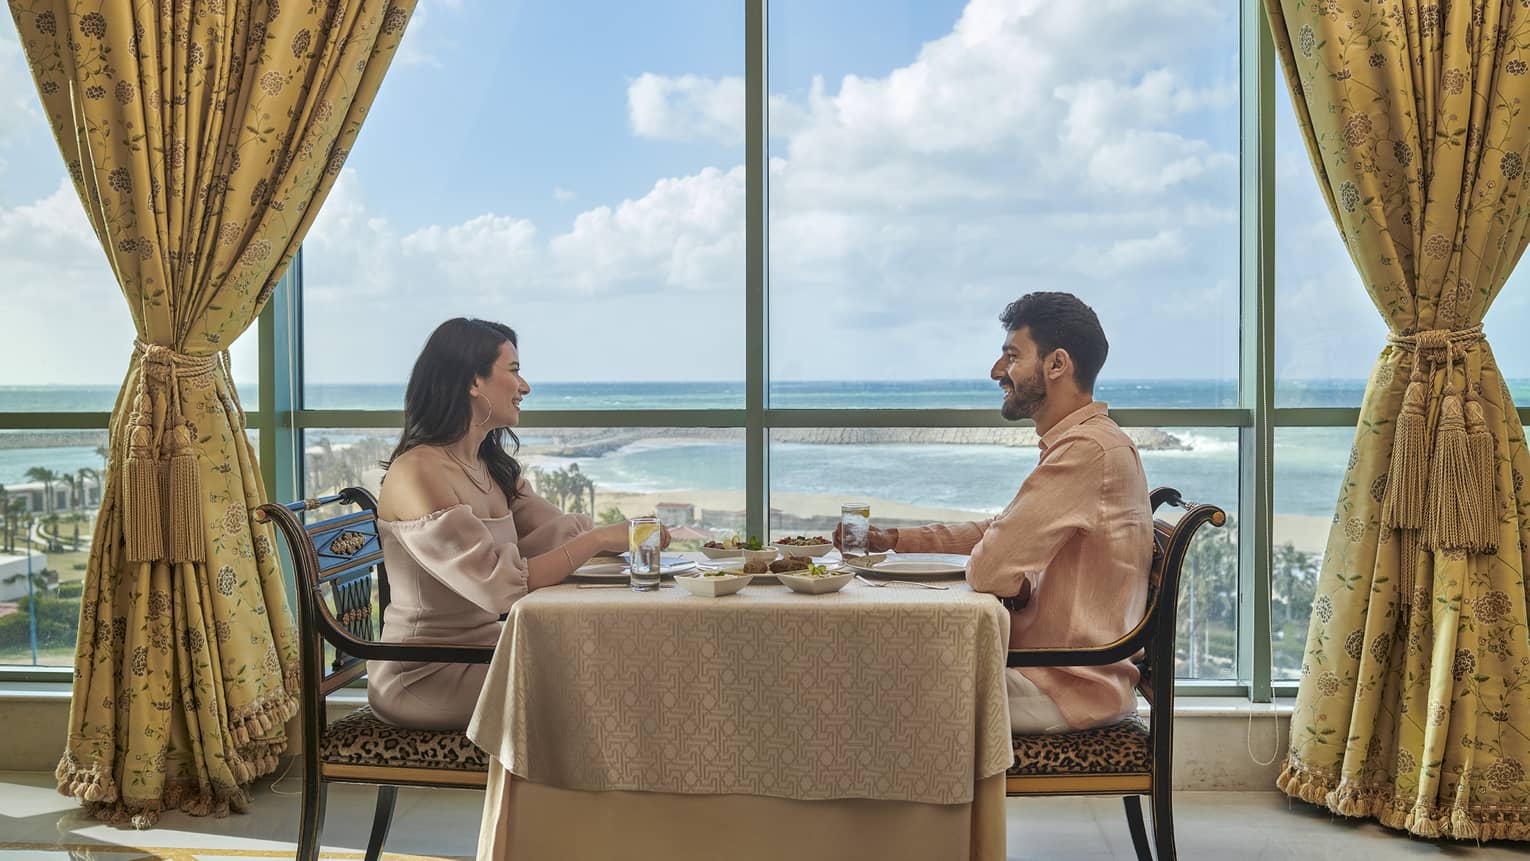 Couple enjoys a meal at Byblos Restaurant with views of the Mediterranean Sea